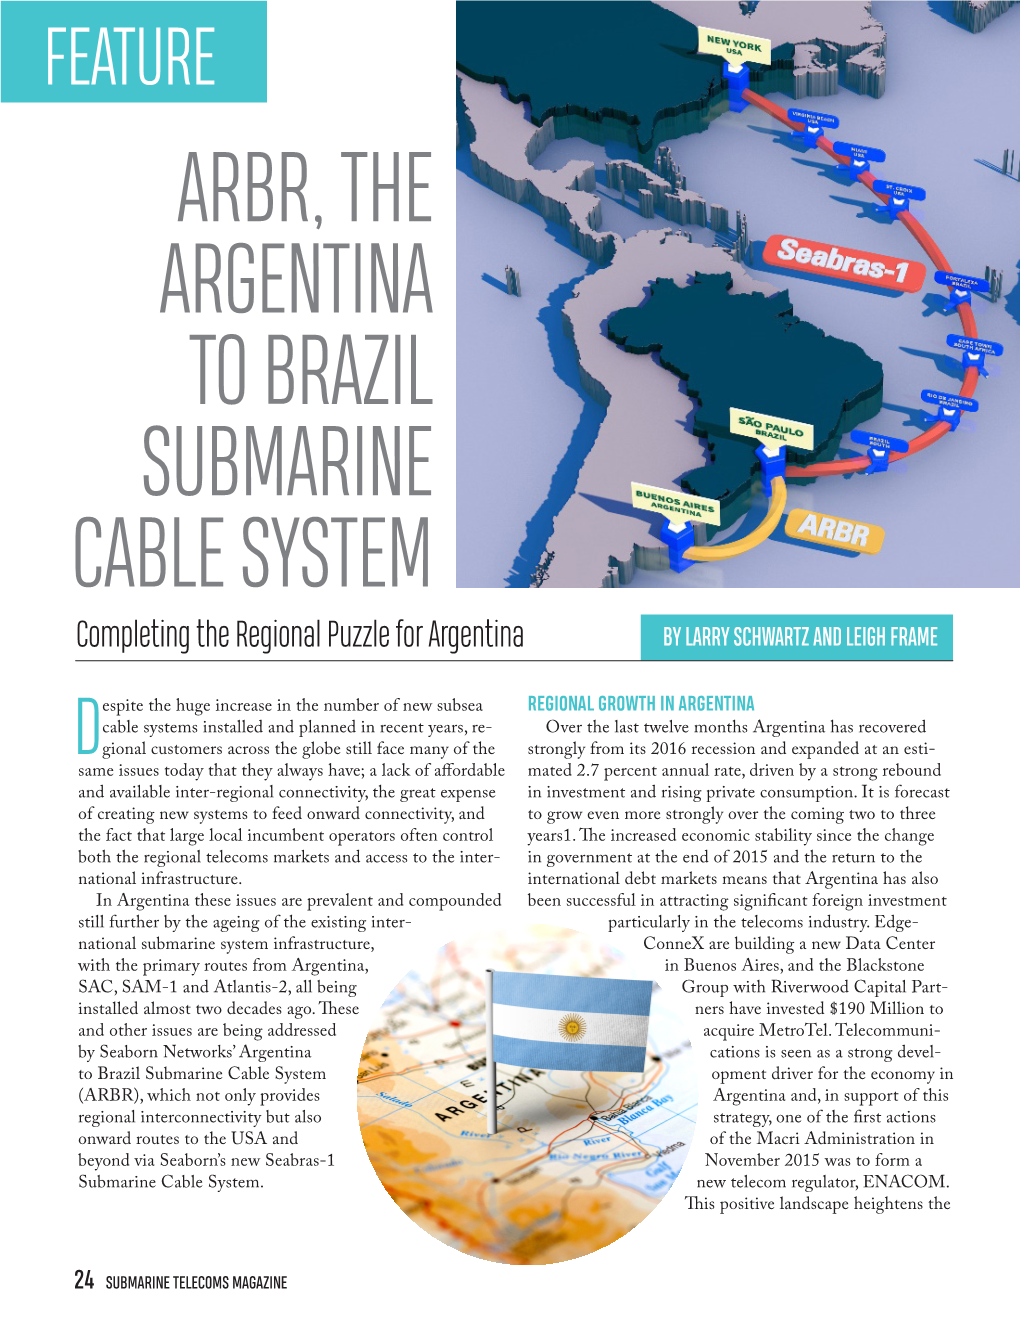 ARBR, the ARGENTINA to BRAZIL SUBMARINE CABLE SYSTEM Completing the Regional Puzzle for Argentina by LARRY SCHWARTZ and LEIGH FRAME